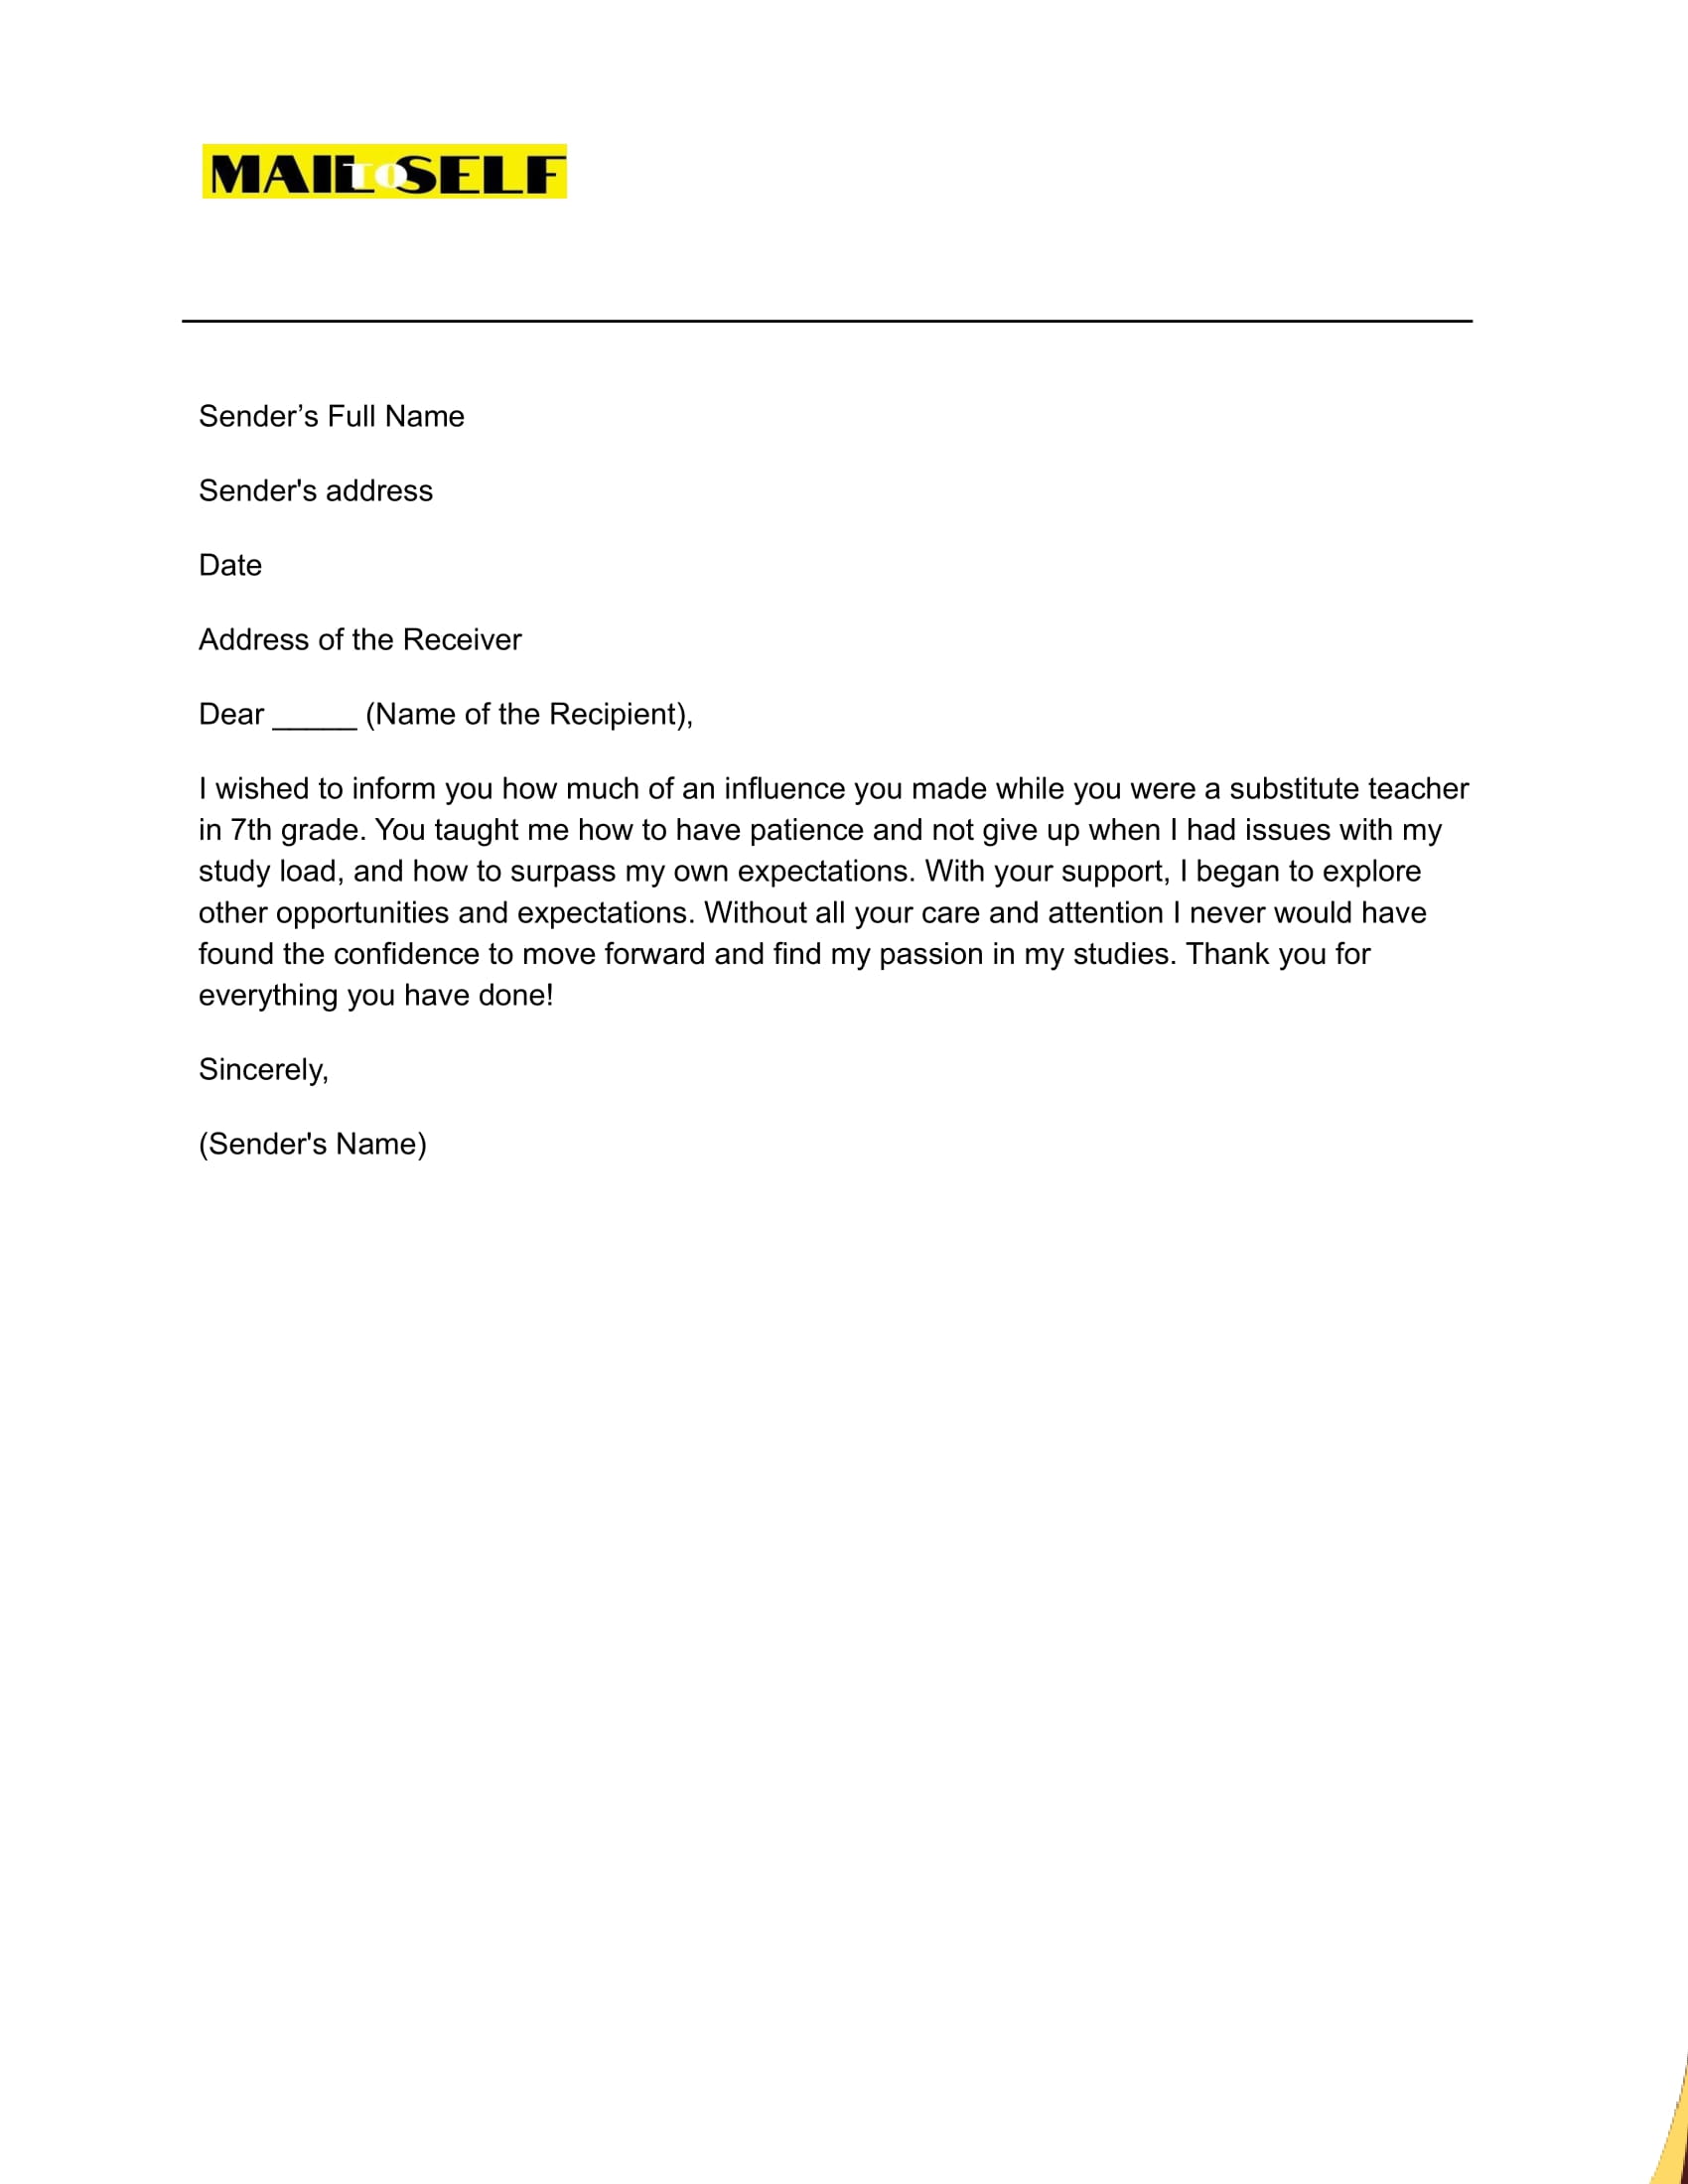 Sample #2 Thank You Letter to Substitute Teacher